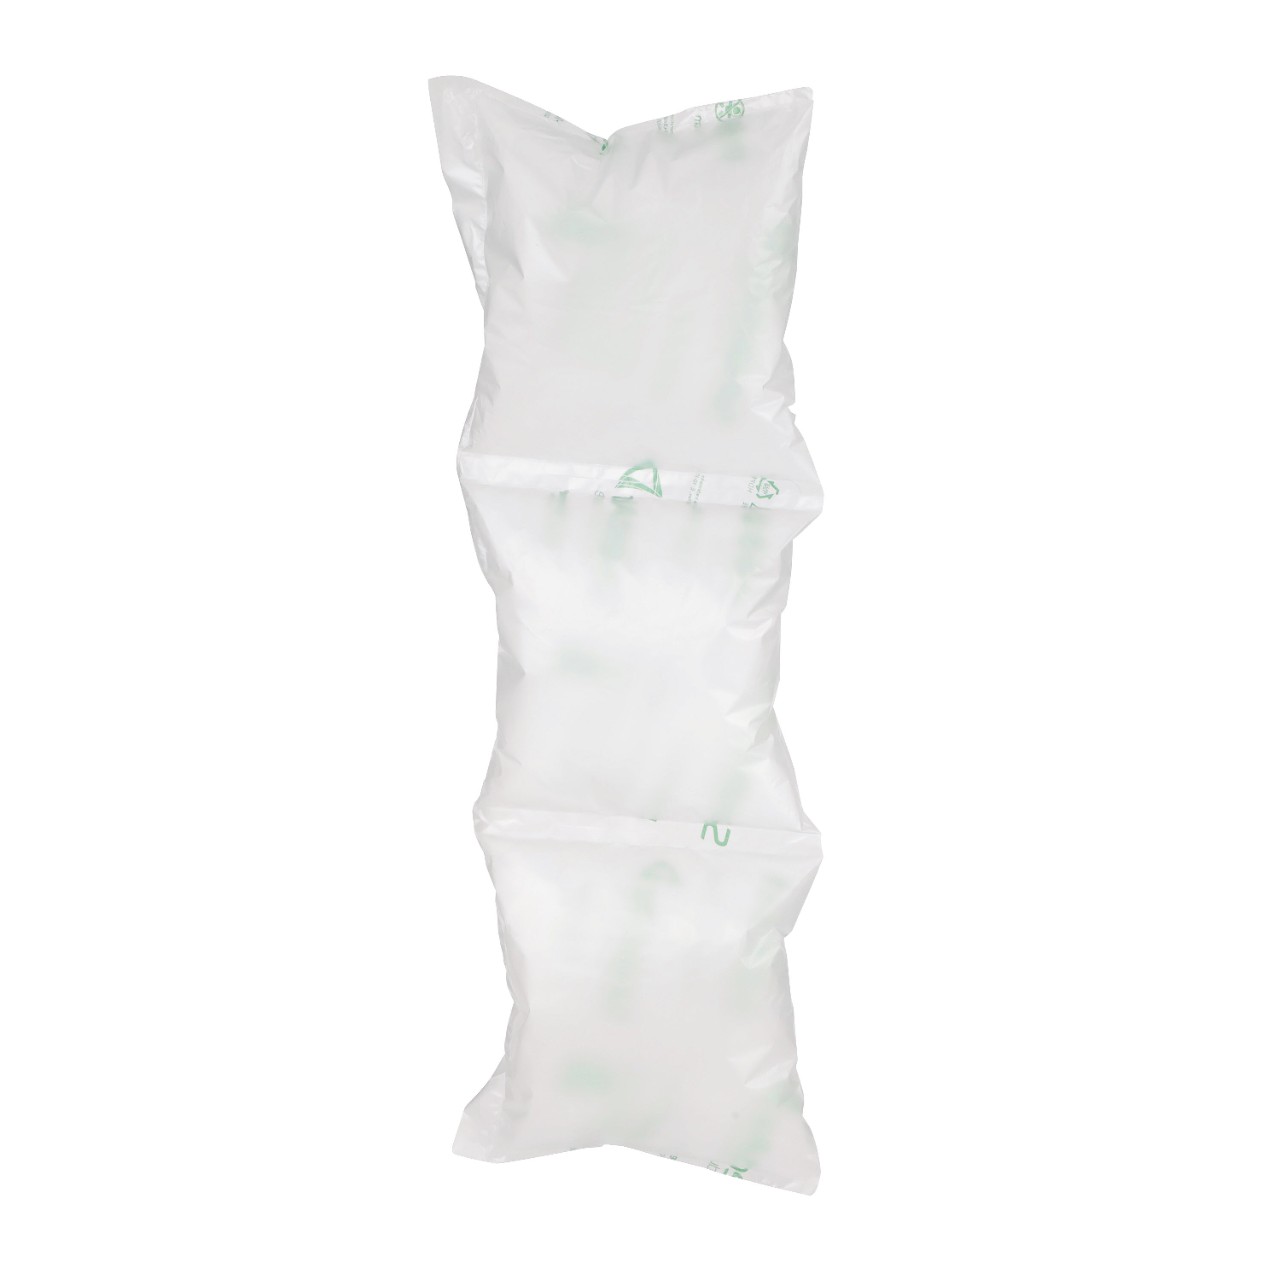 BUBBLE WRAP® Brand Extreme Inflatable Air Pillows